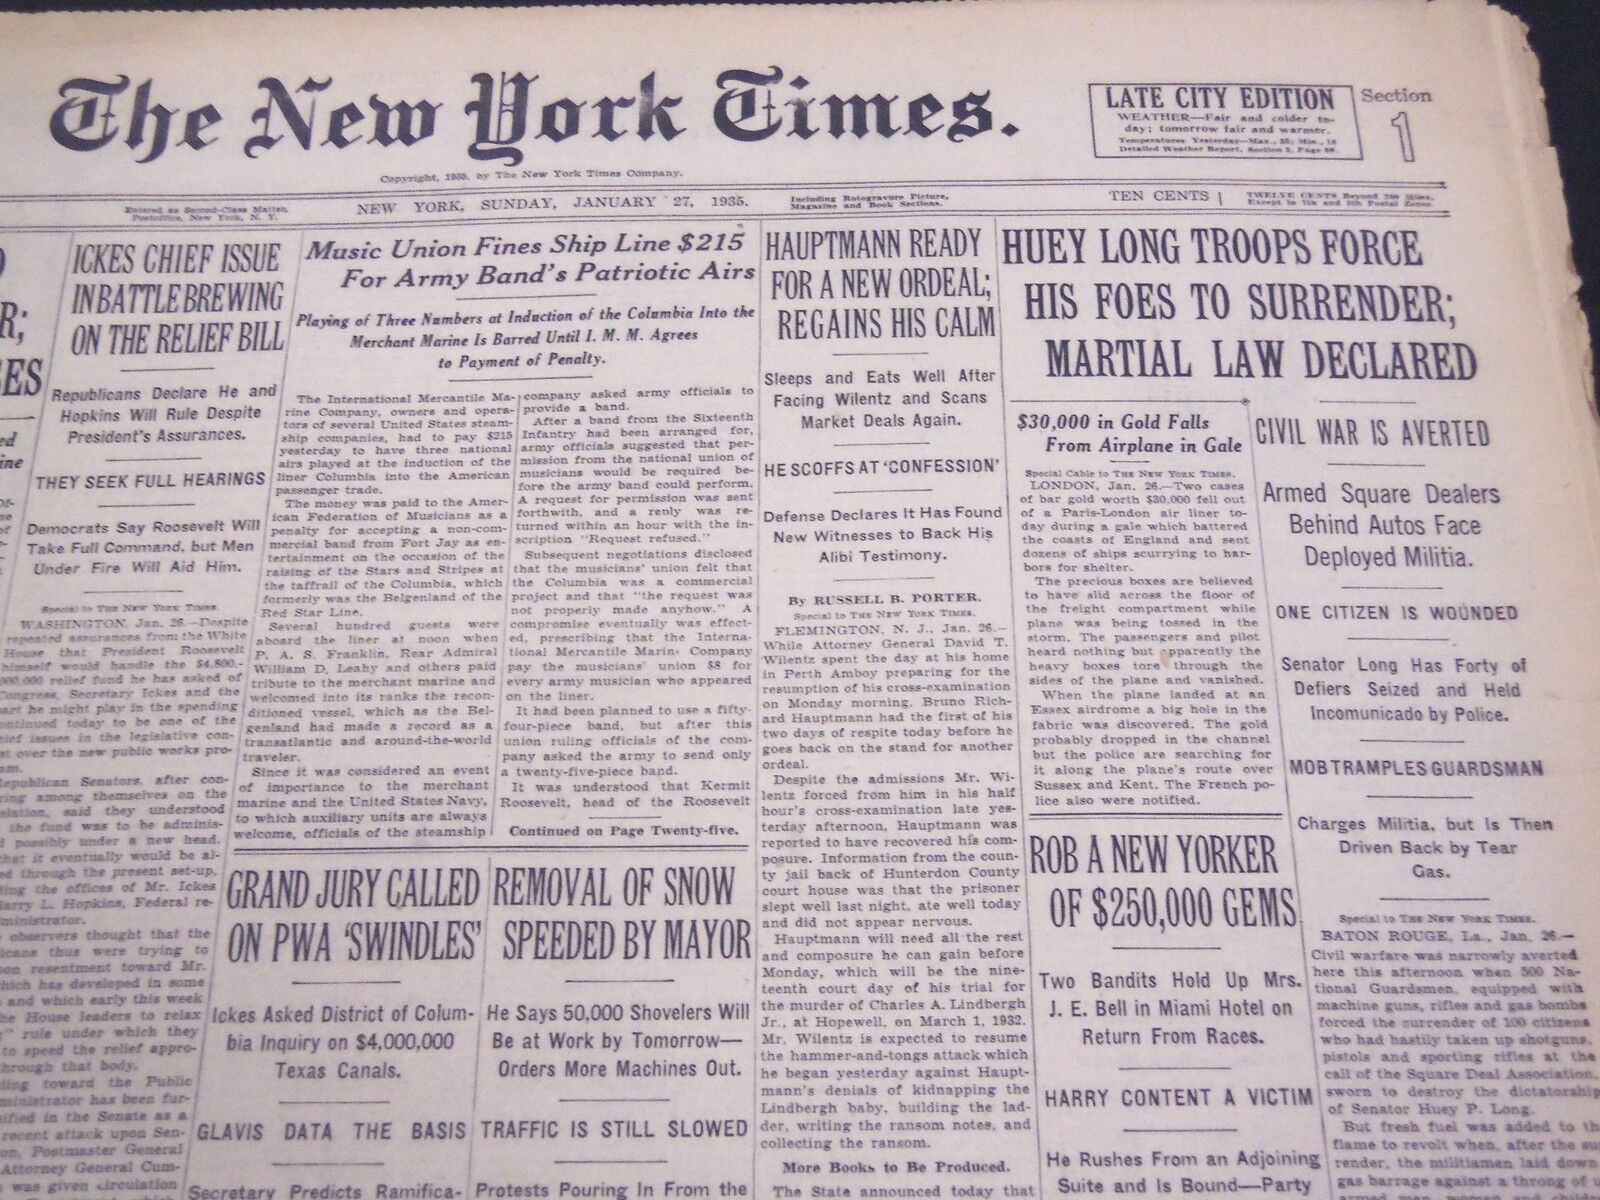 1935 JANUARY 27 NEW YORK TIMES - HUEY LONG TROOPS FORCE FOES SURRENDER - NT 4377